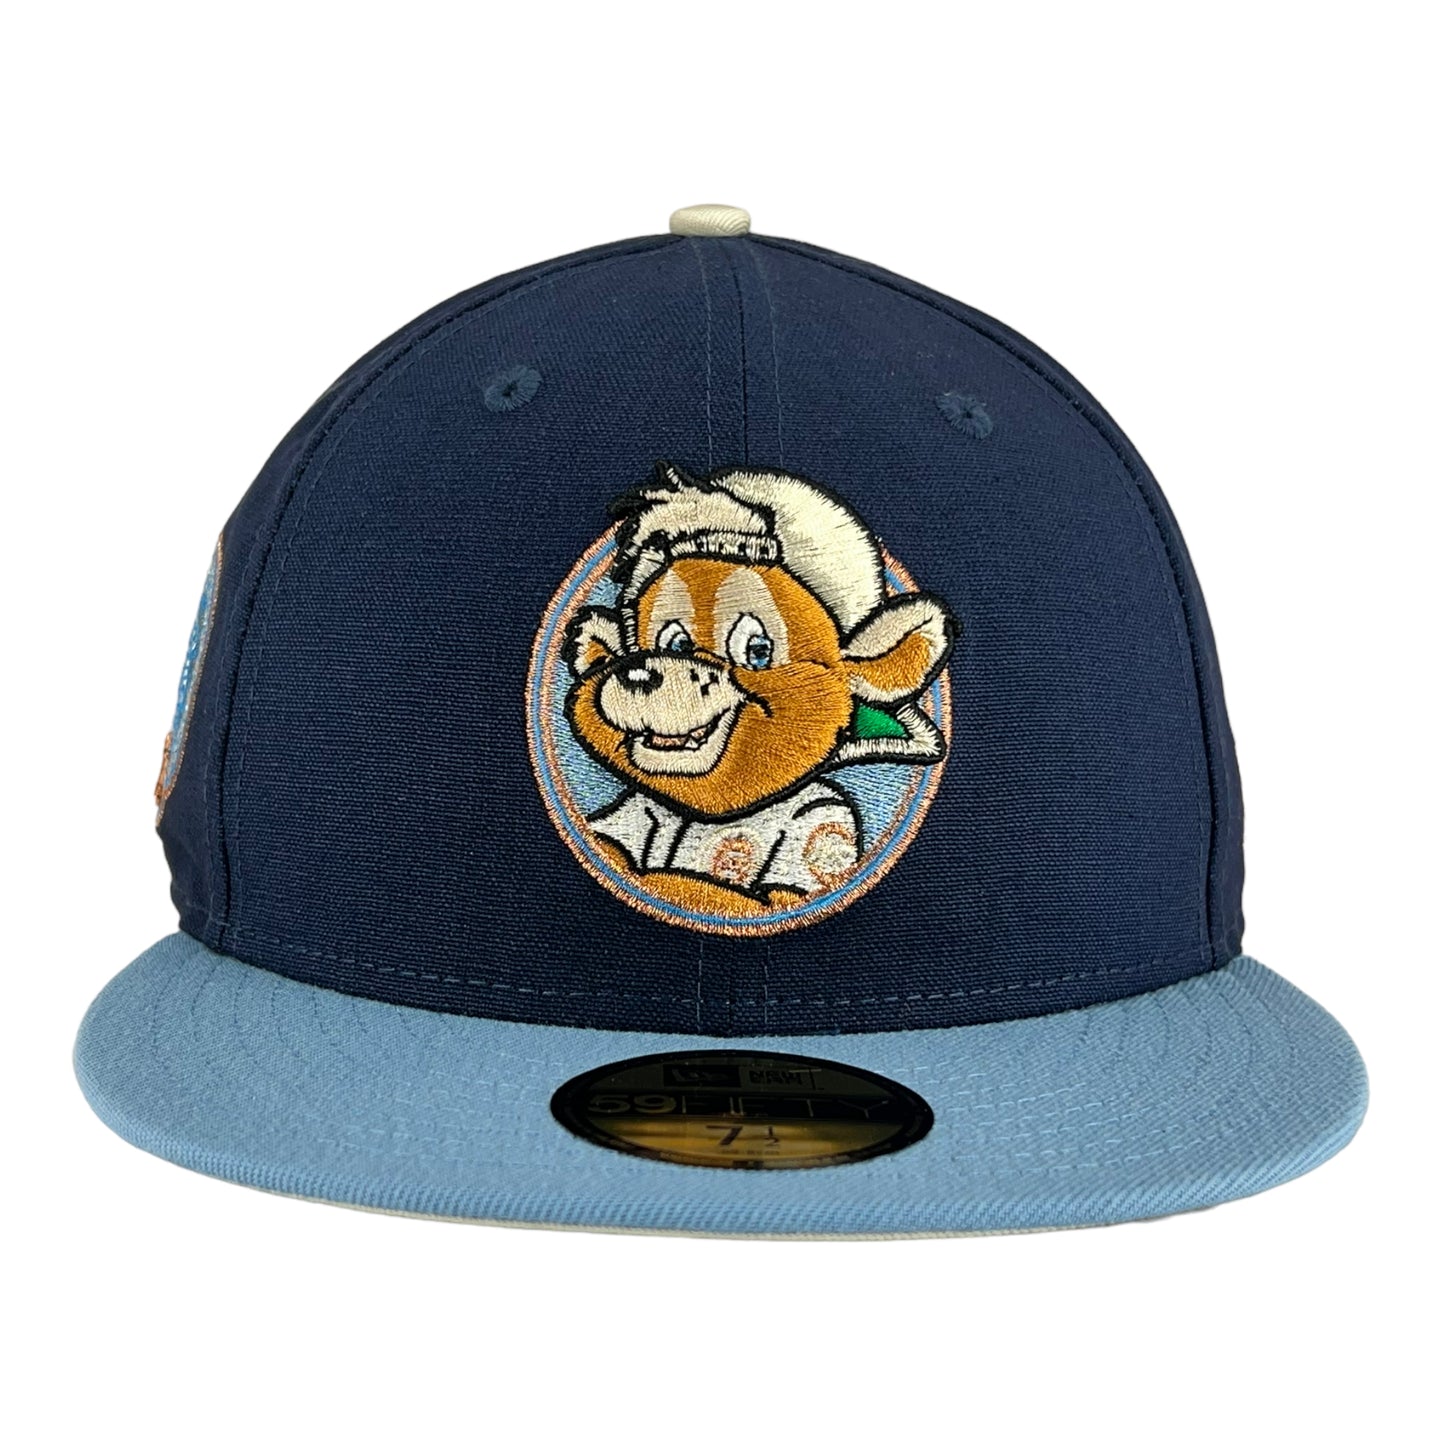 Chicago Cubs Oceanside Blue/Light Blue Clark Cub New Era 59FIFTY Fitted Hat